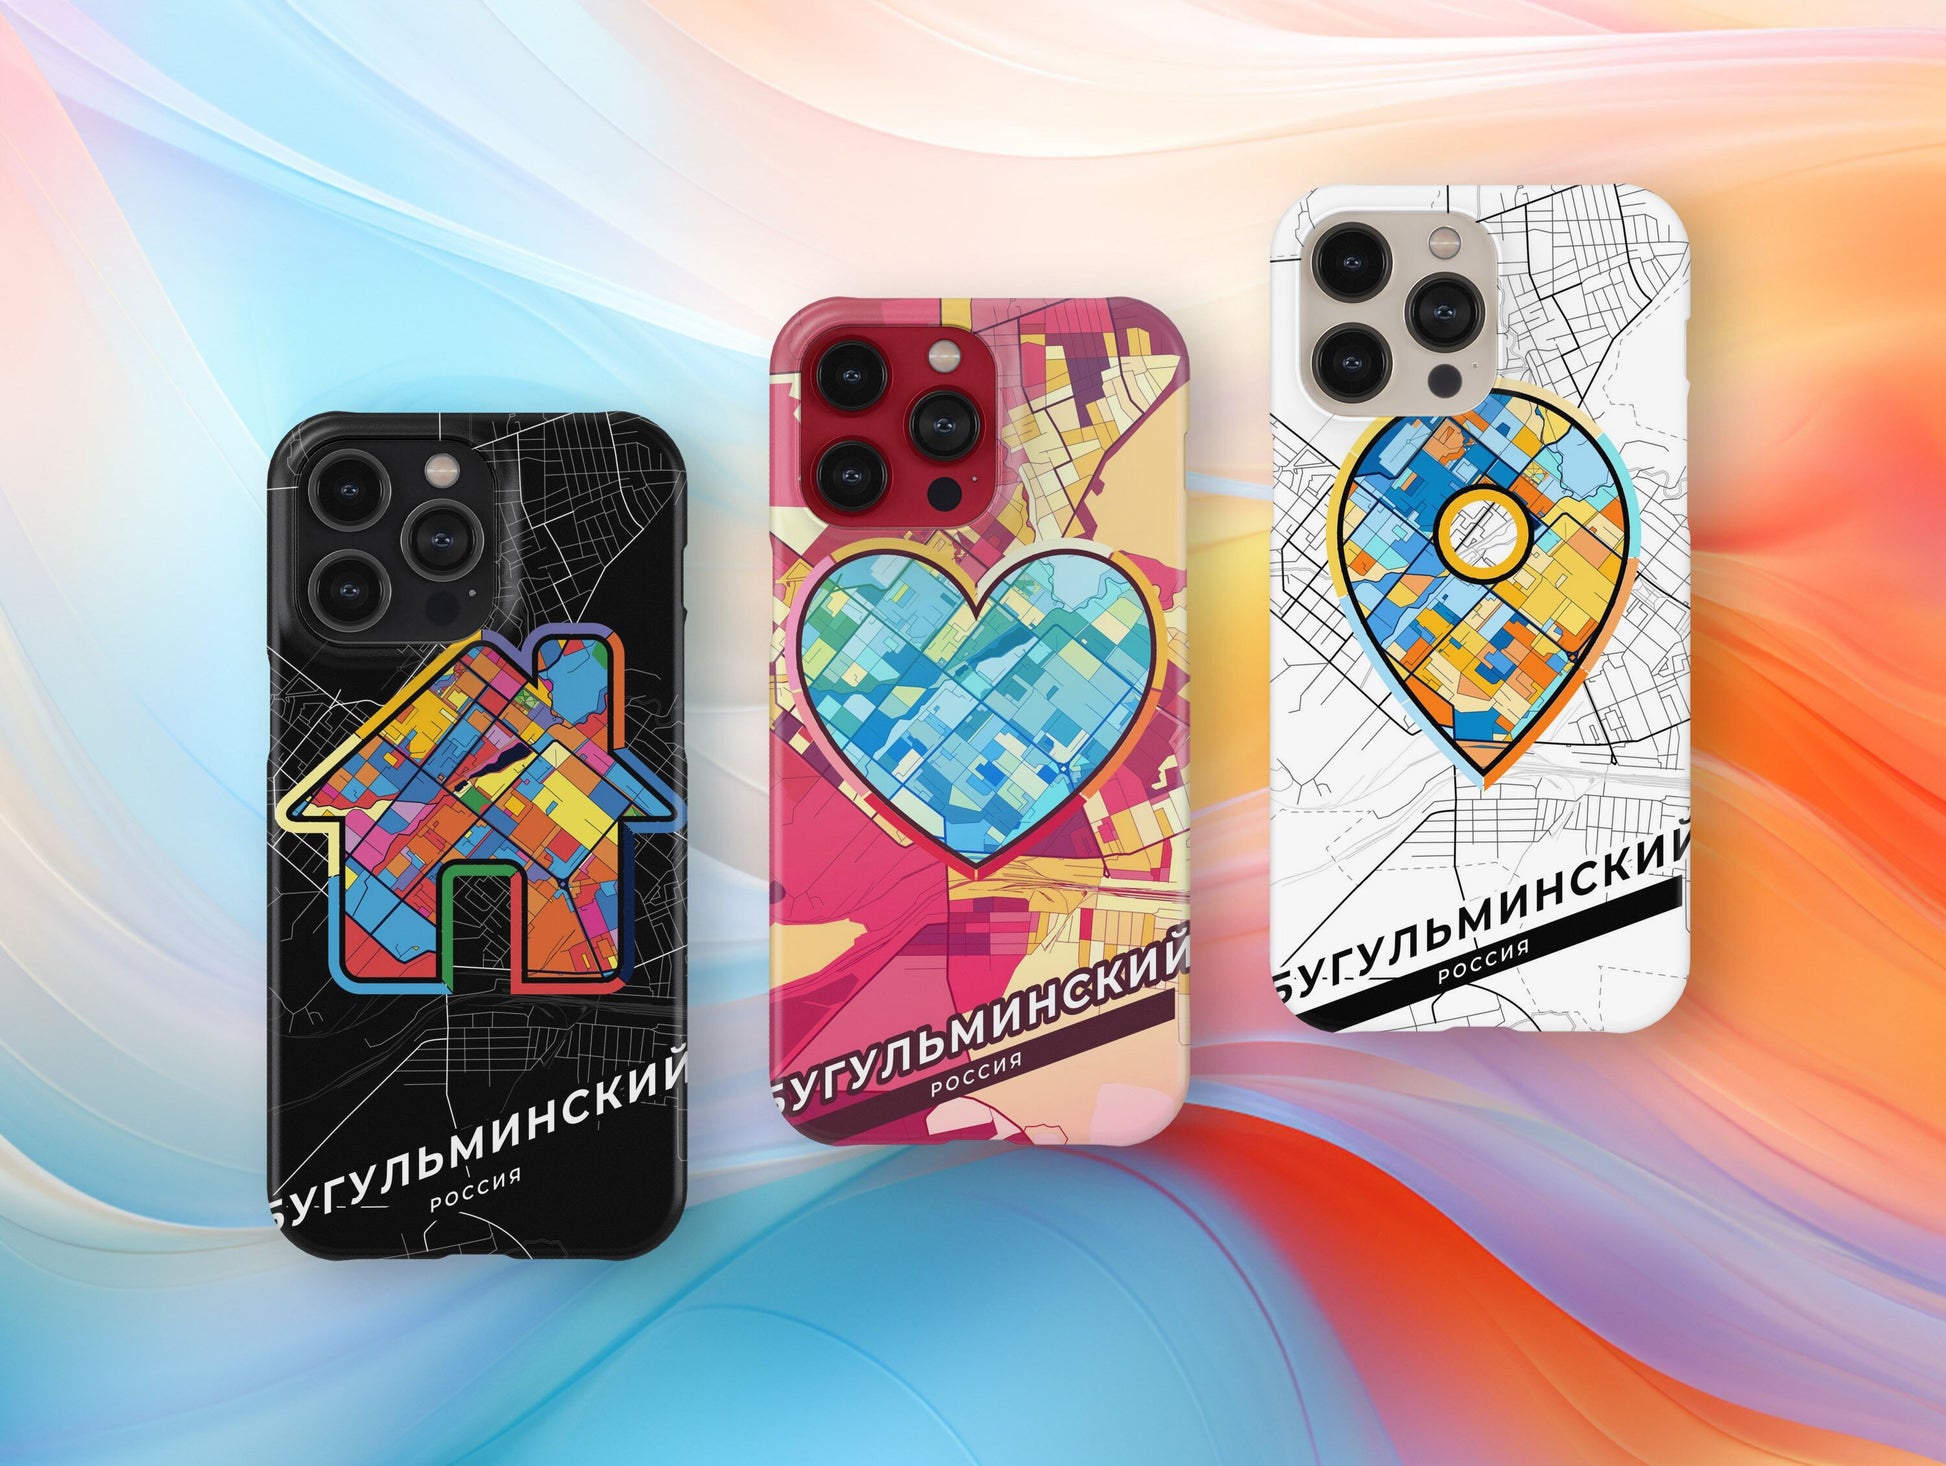 Bugulma Russia slim phone case with colorful icon. Birthday, wedding or housewarming gift. Couple match cases.